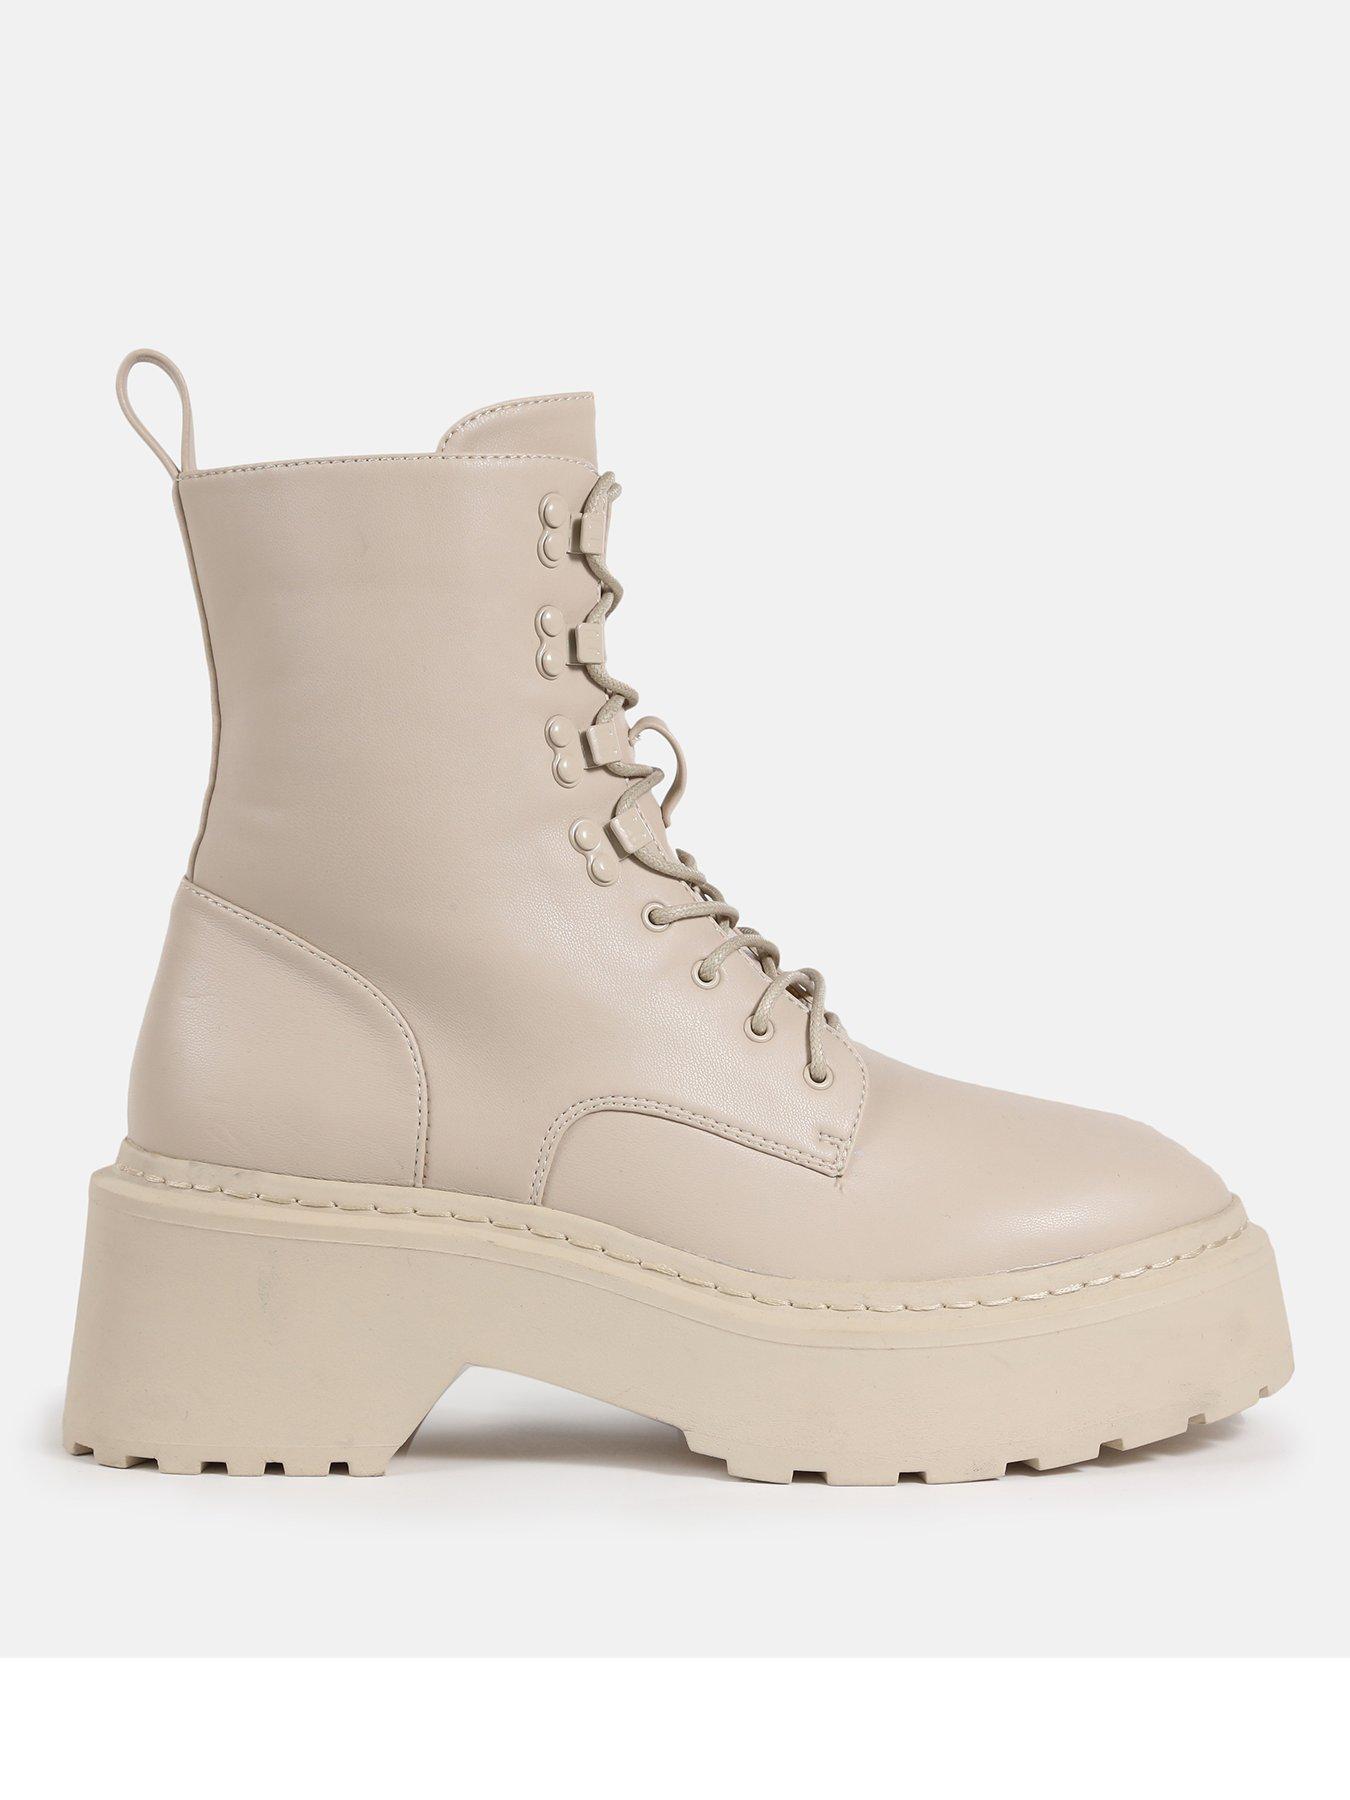 Missguided Lace Up Chunky Sole Ankle Boots - Cream | very.co.uk